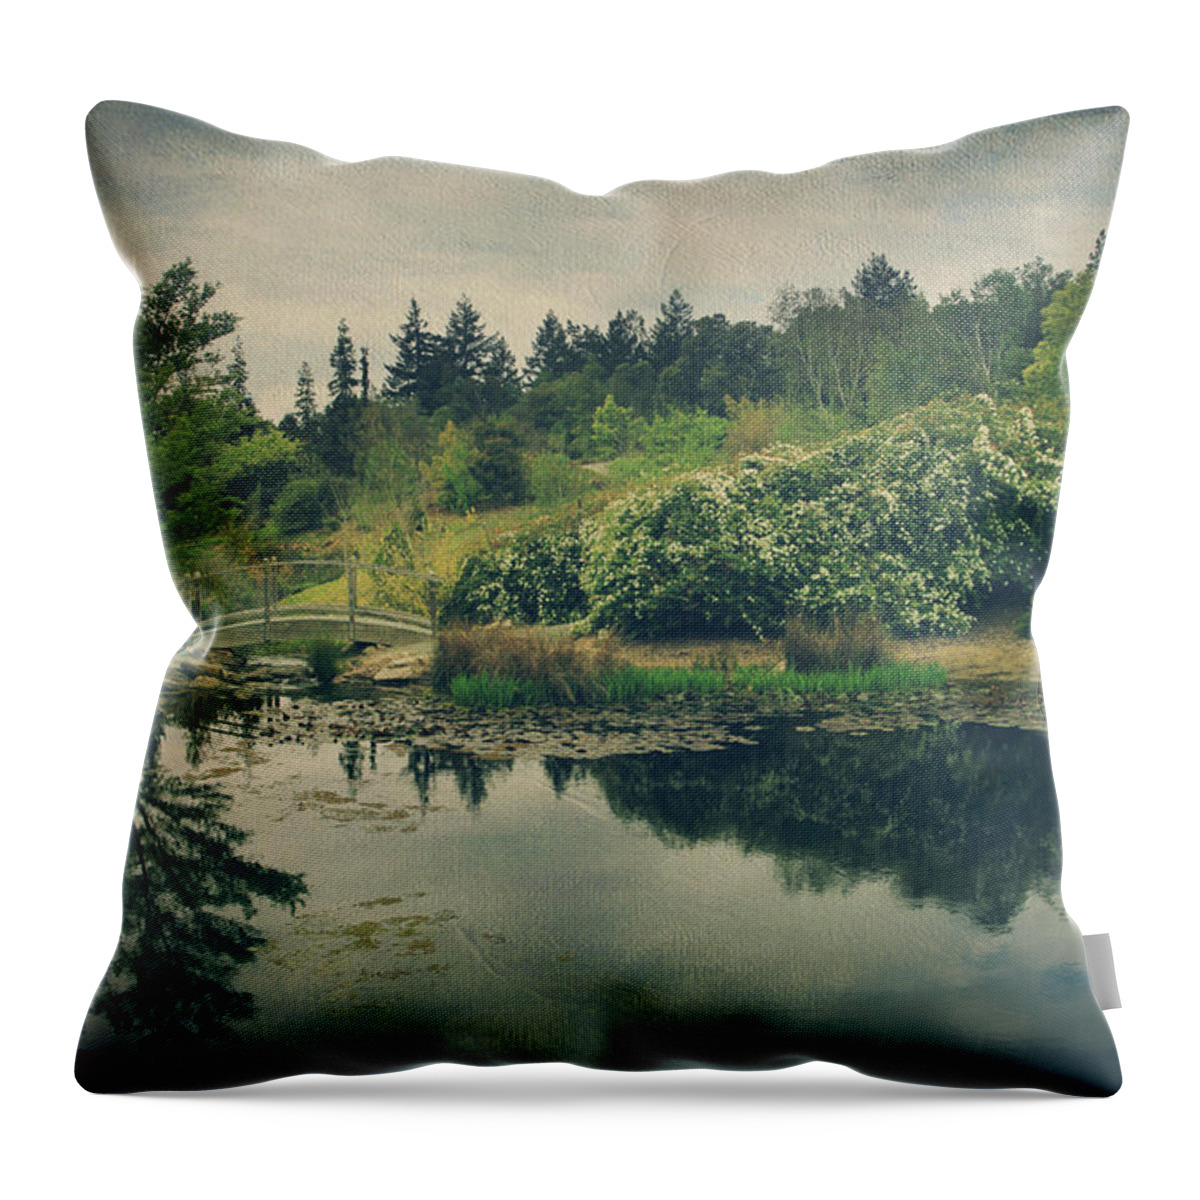 Quarry Hills Botanical Garden Throw Pillow featuring the photograph Even After You're Gone by Laurie Search